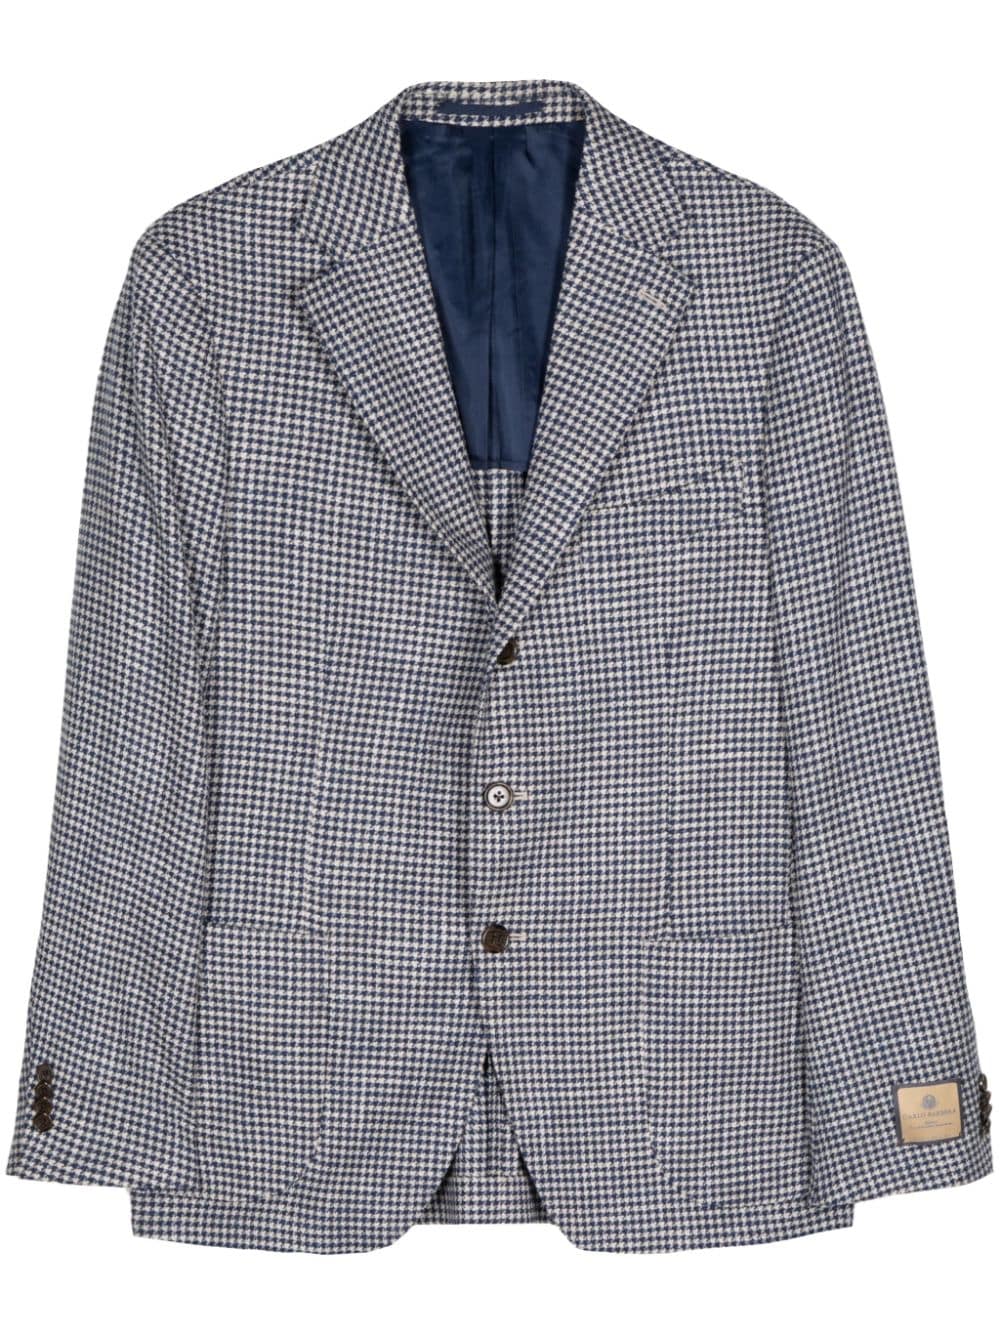 Man On The Boon. Houndstooth Single-breasted Jacket In Blue